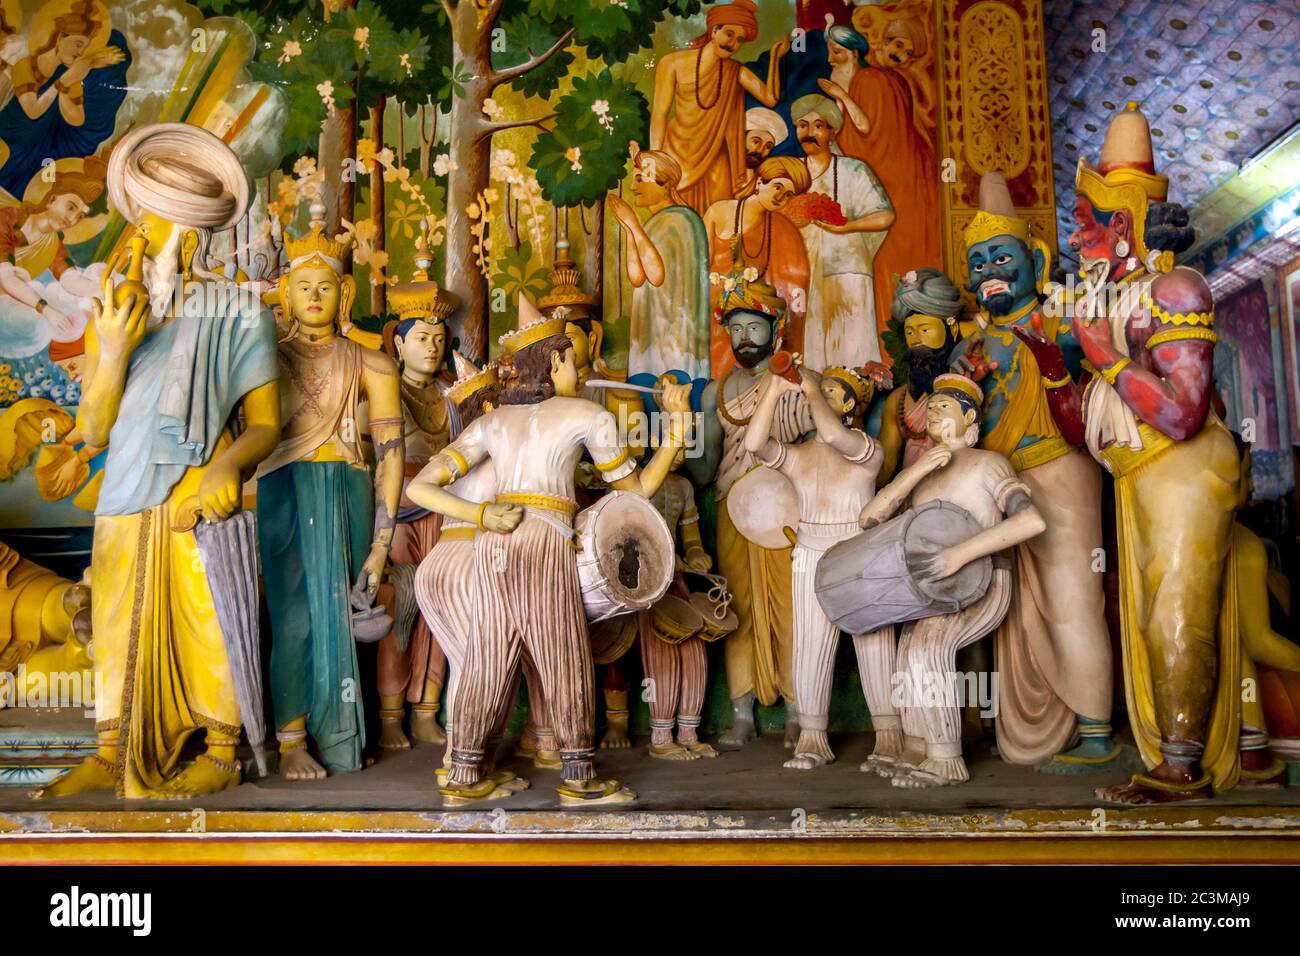 A colourful display of human figures including musicians and drummers in the main Image House at Wewurukannala Vihara at Dickwella in Sri Lanka. Stock Photo